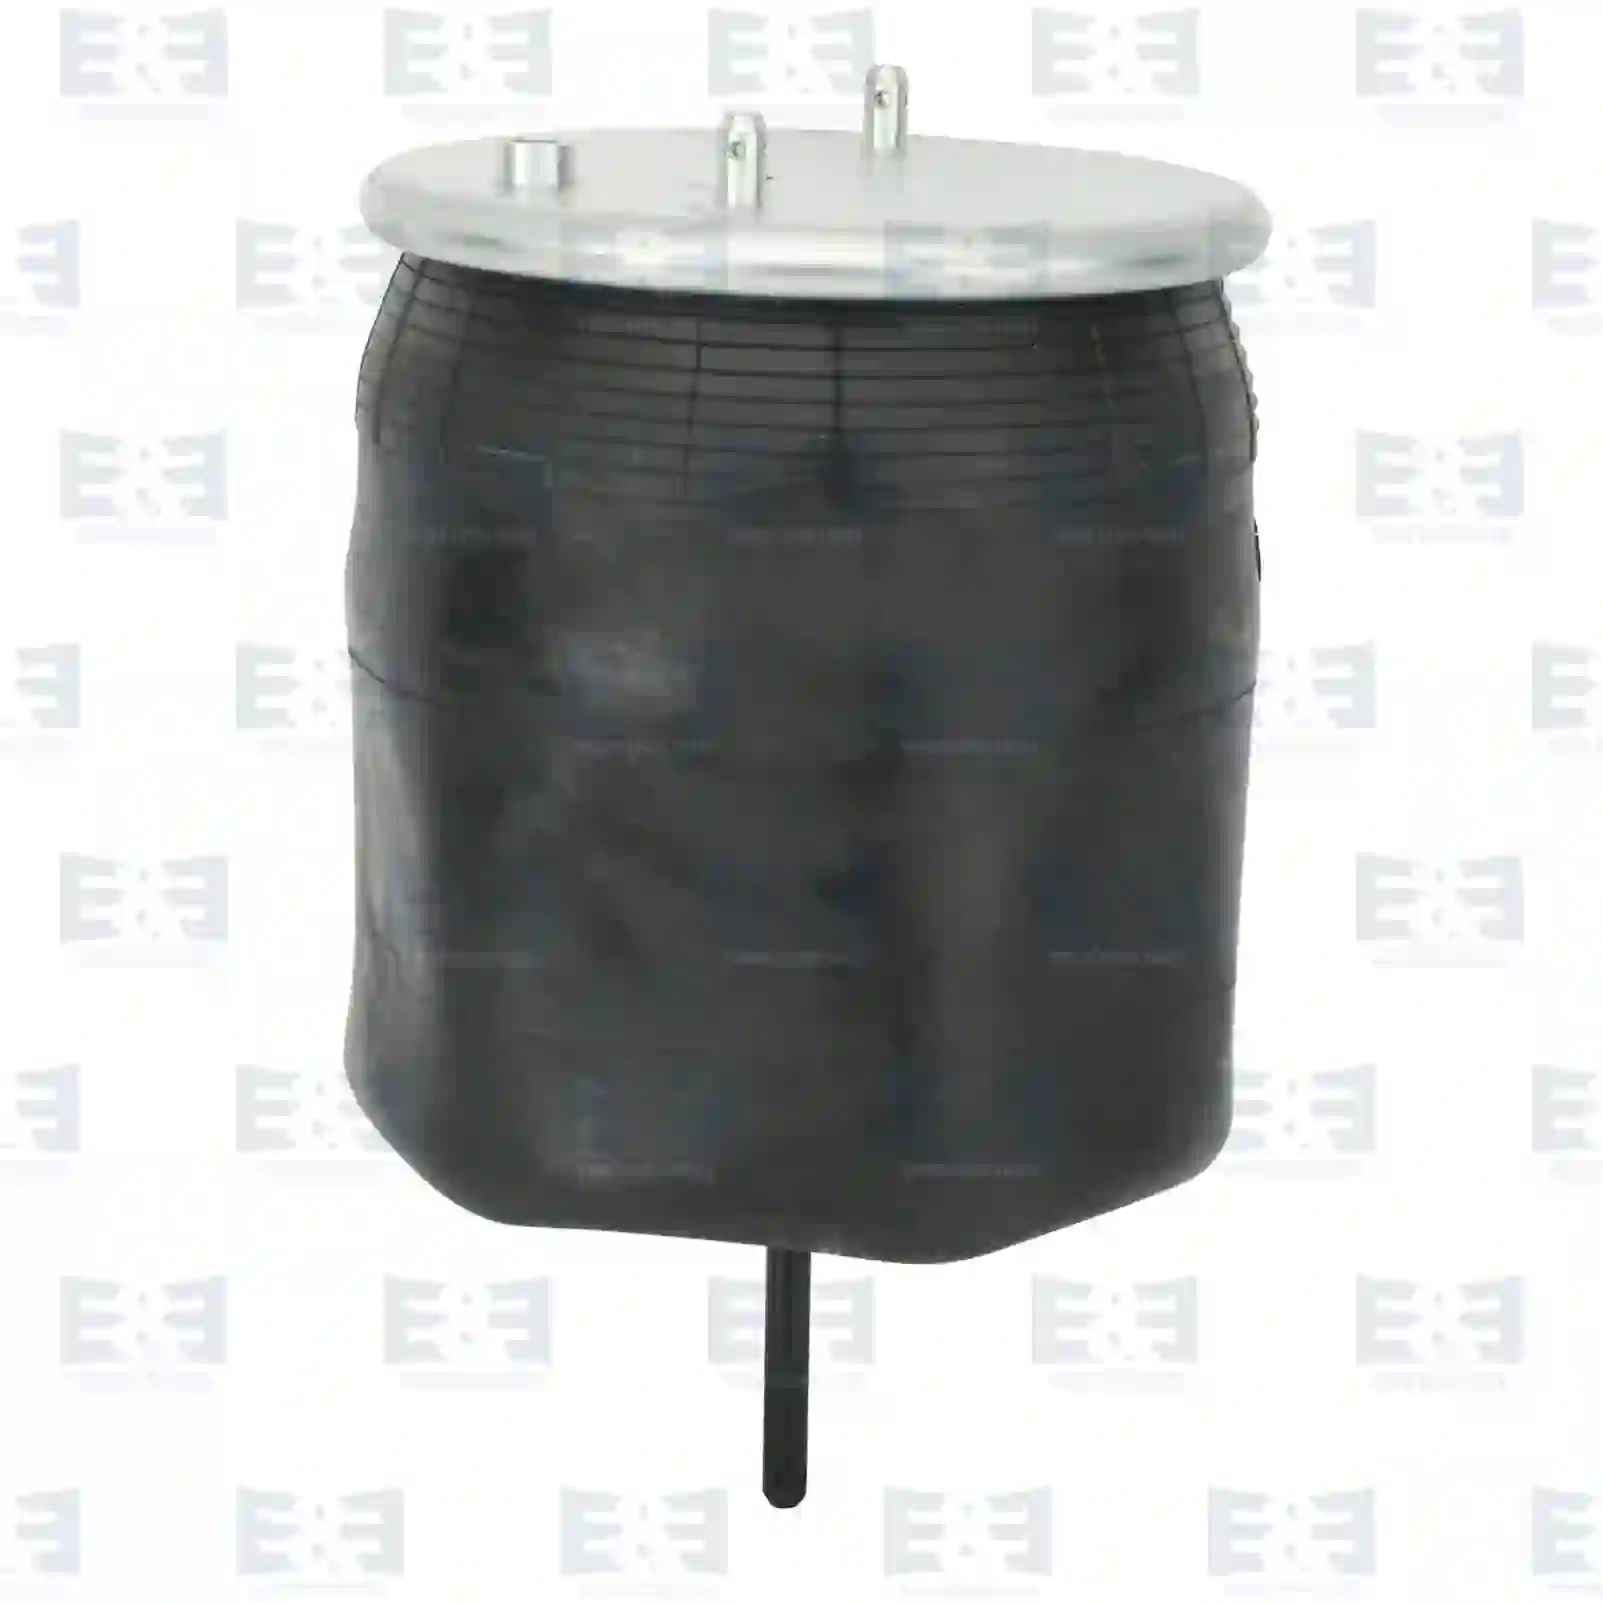 Air spring, with steel piston, without adapter, 2E2270994, MLF7142, 1440304, 470922, ZG40802-0008 ||  2E2270994 E&E Truck Spare Parts | Truck Spare Parts, Auotomotive Spare Parts Air spring, with steel piston, without adapter, 2E2270994, MLF7142, 1440304, 470922, ZG40802-0008 ||  2E2270994 E&E Truck Spare Parts | Truck Spare Parts, Auotomotive Spare Parts